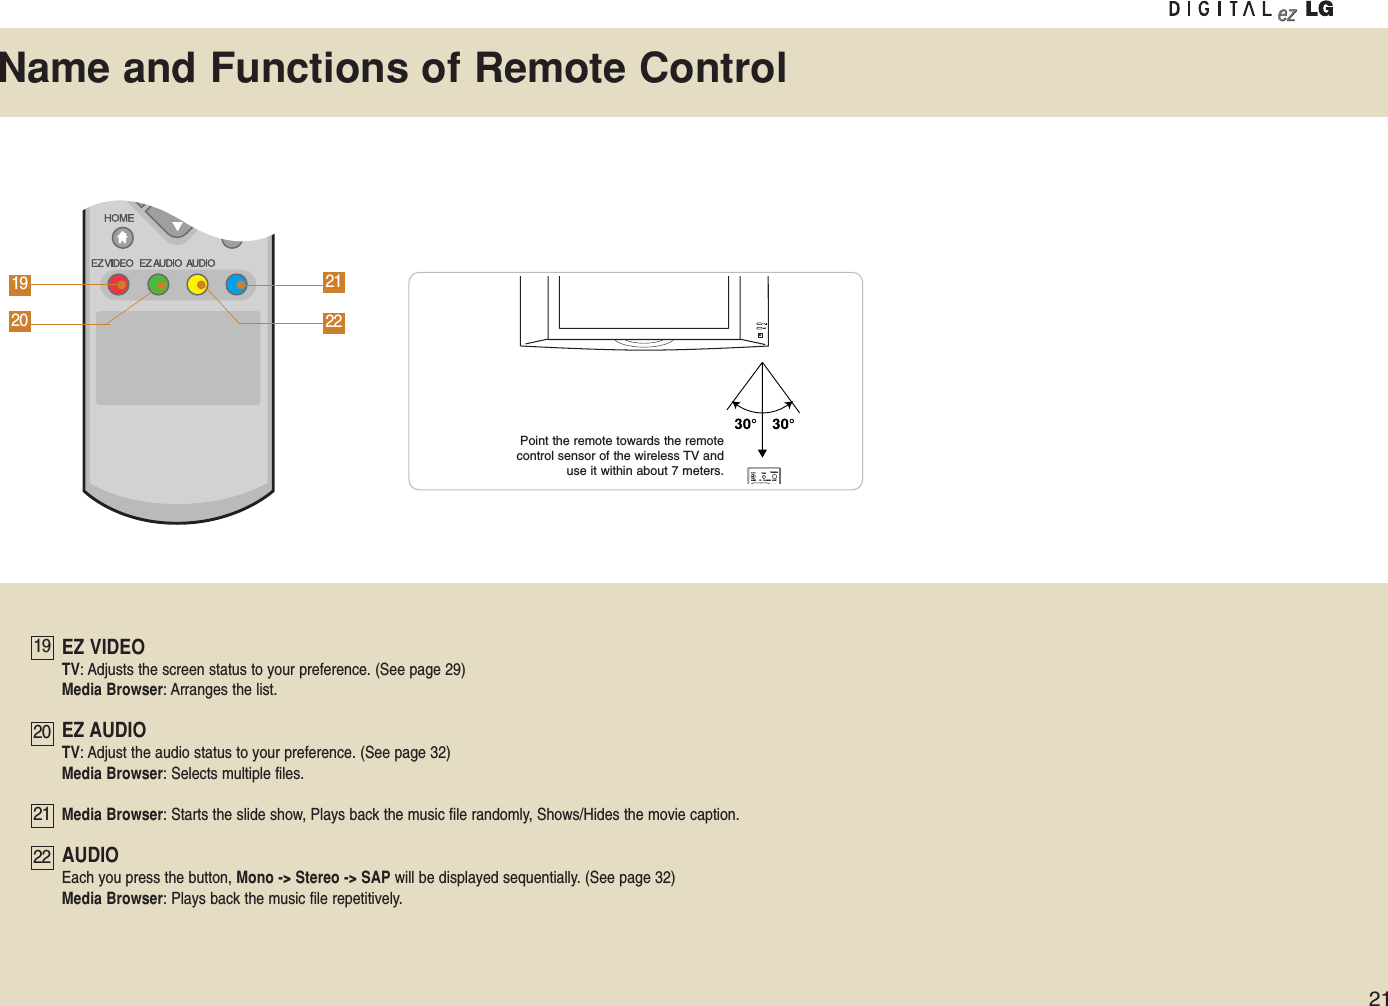 2119202122Name and Functions of Remote ControlTV/AVTV/AV TV/MEDIATV/MEDIASLEEPSLEEP CCCC FLASHBKFLASHBK SURFSURFPoint the remote towards the remotecontrol sensor of the wireless TV anduse it within about 7 meters.EZ VIDEOTV: Adjusts the screen status to your preference. (See page 29)Media Browser: Arranges the list.EZ AUDIOTV: Adjust the audio status to your preference. (See page 32)Media Browser: Selects multiple files.Media Browser: Starts the slide show, Plays back the music file randomly, Shows/Hides the movie caption.AUDIOEach you press the button, Mono -&gt; Stereo -&gt; SAP will be displayed sequentially. (See page 32)Media Browser: Plays back the music file repetitively.19202221